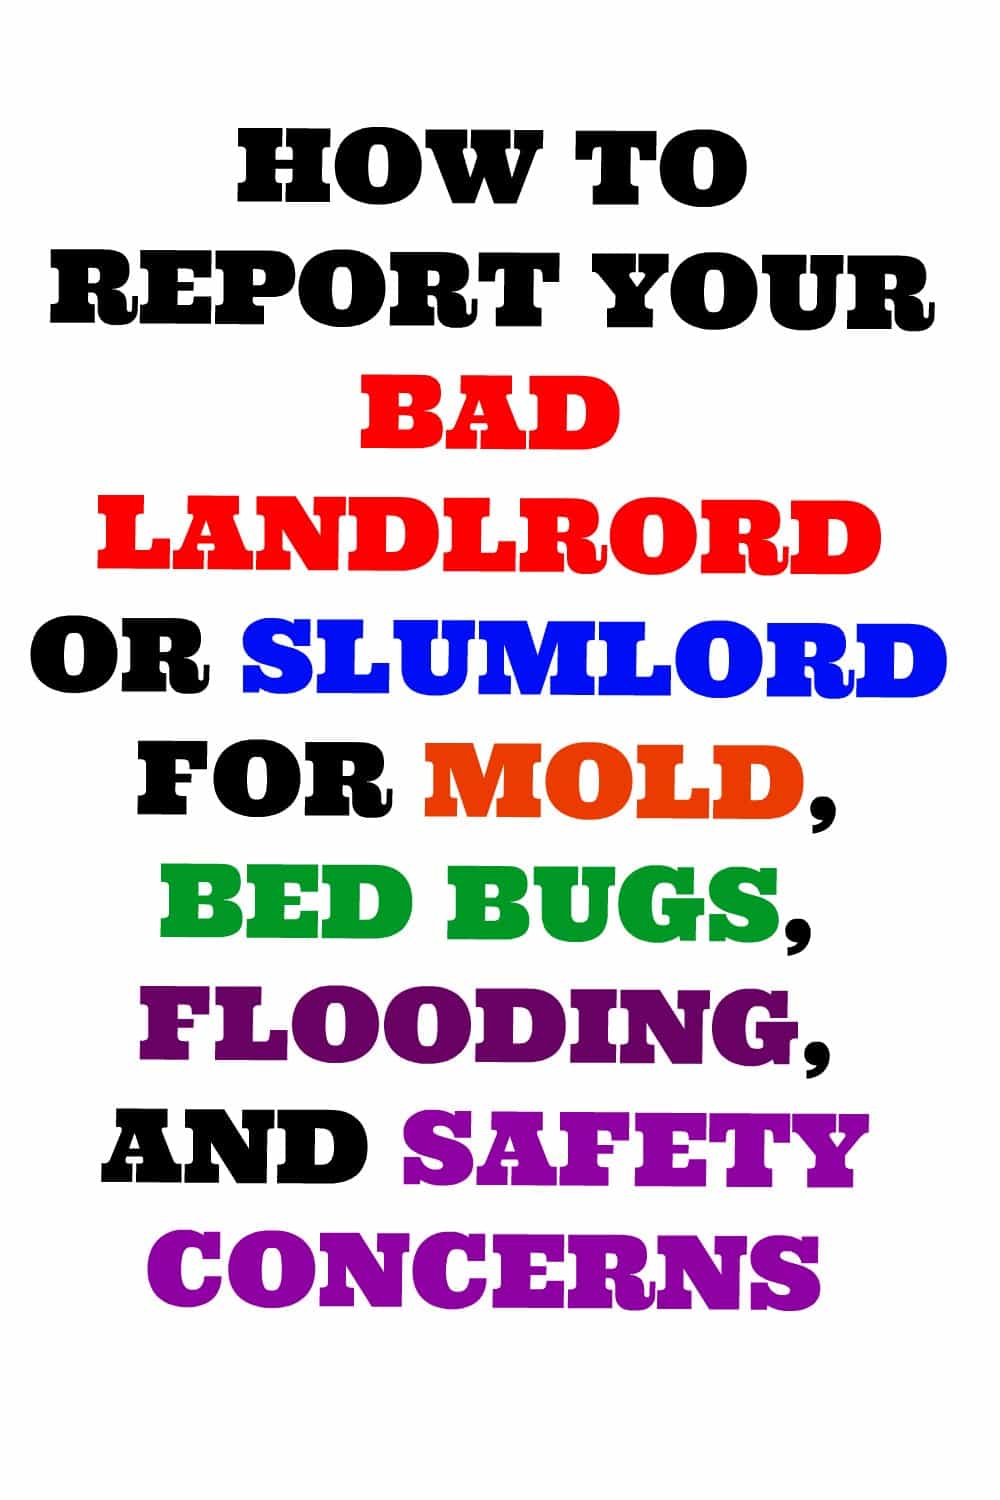 How To Report a Bad Landlord Or Slumlord for Mold, Bed Bugs, Flooding, and Safety Concerns,